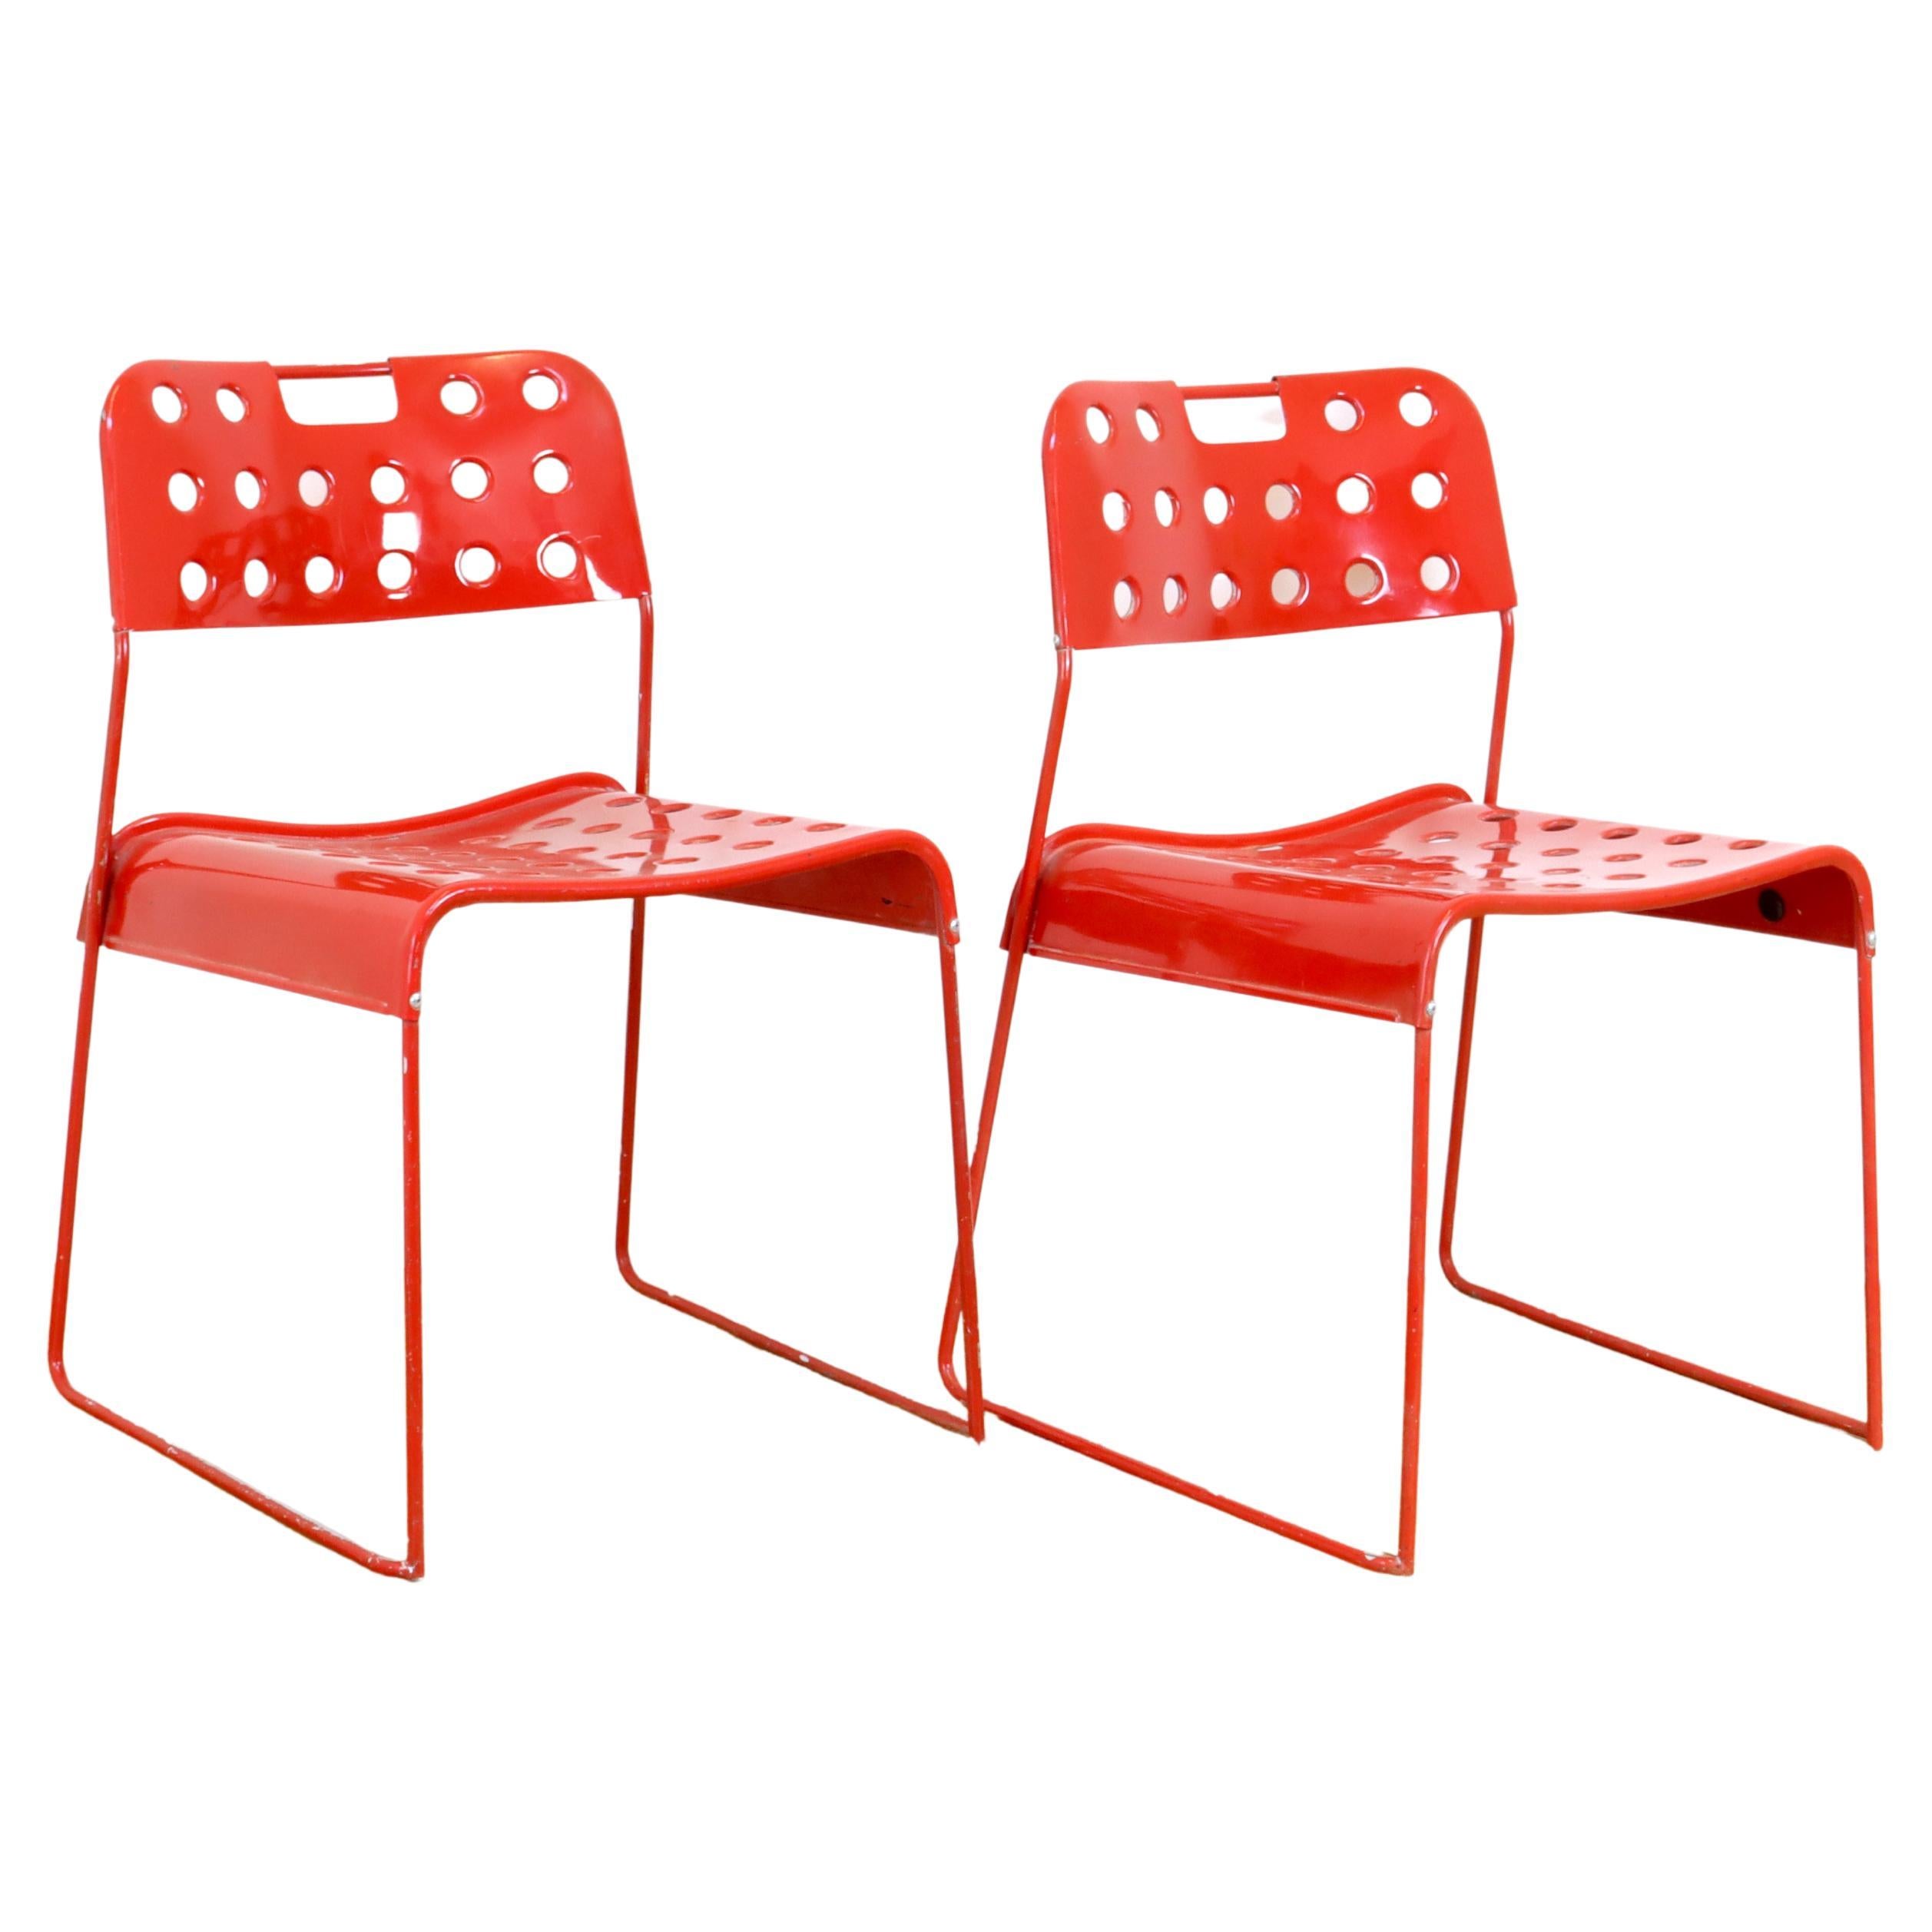 Pair of Vintage Red Omkstak Chairs 